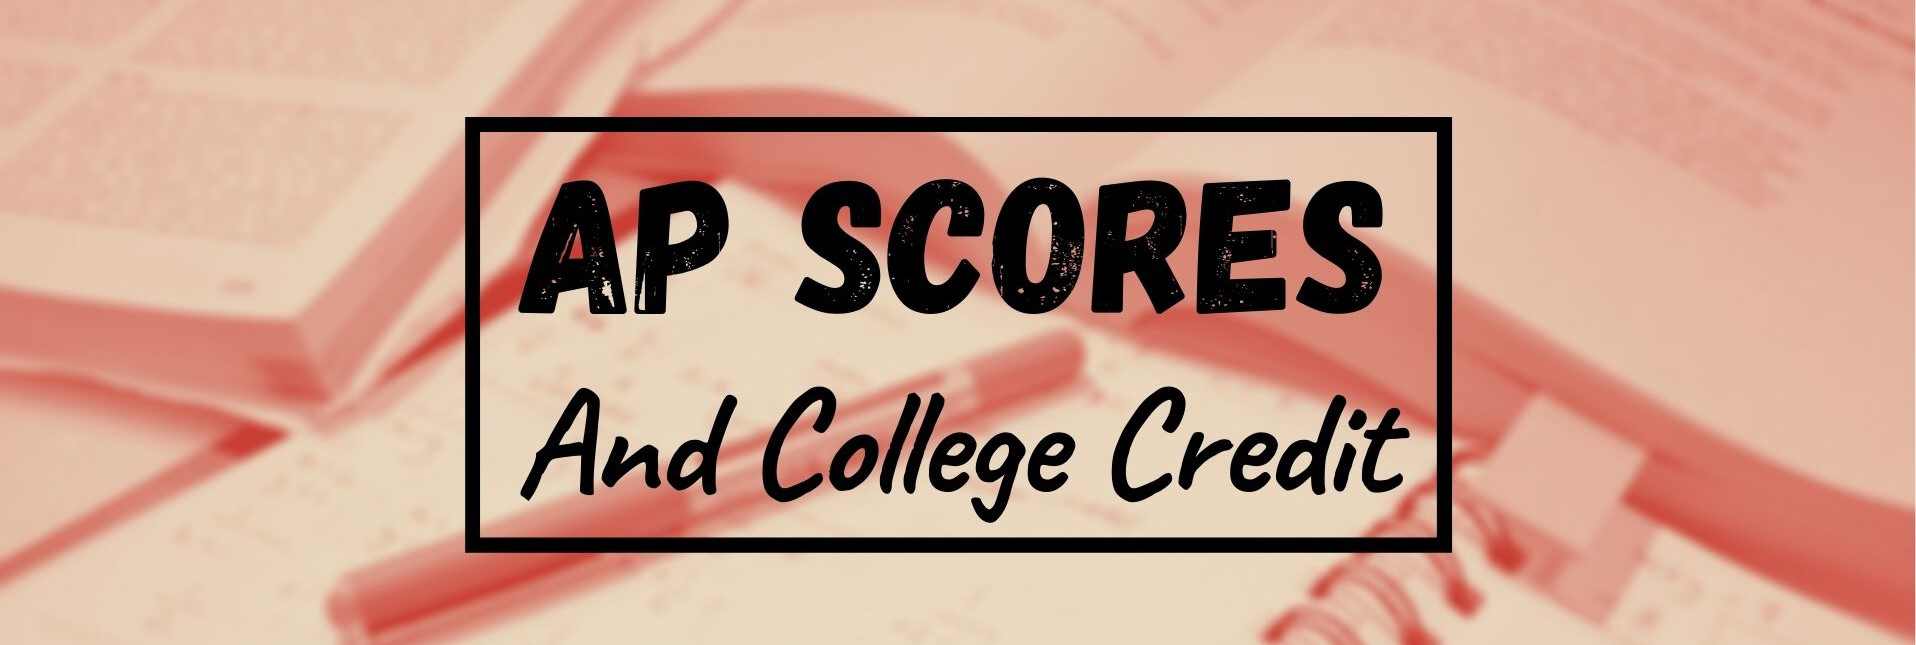 AP Scores and college credit